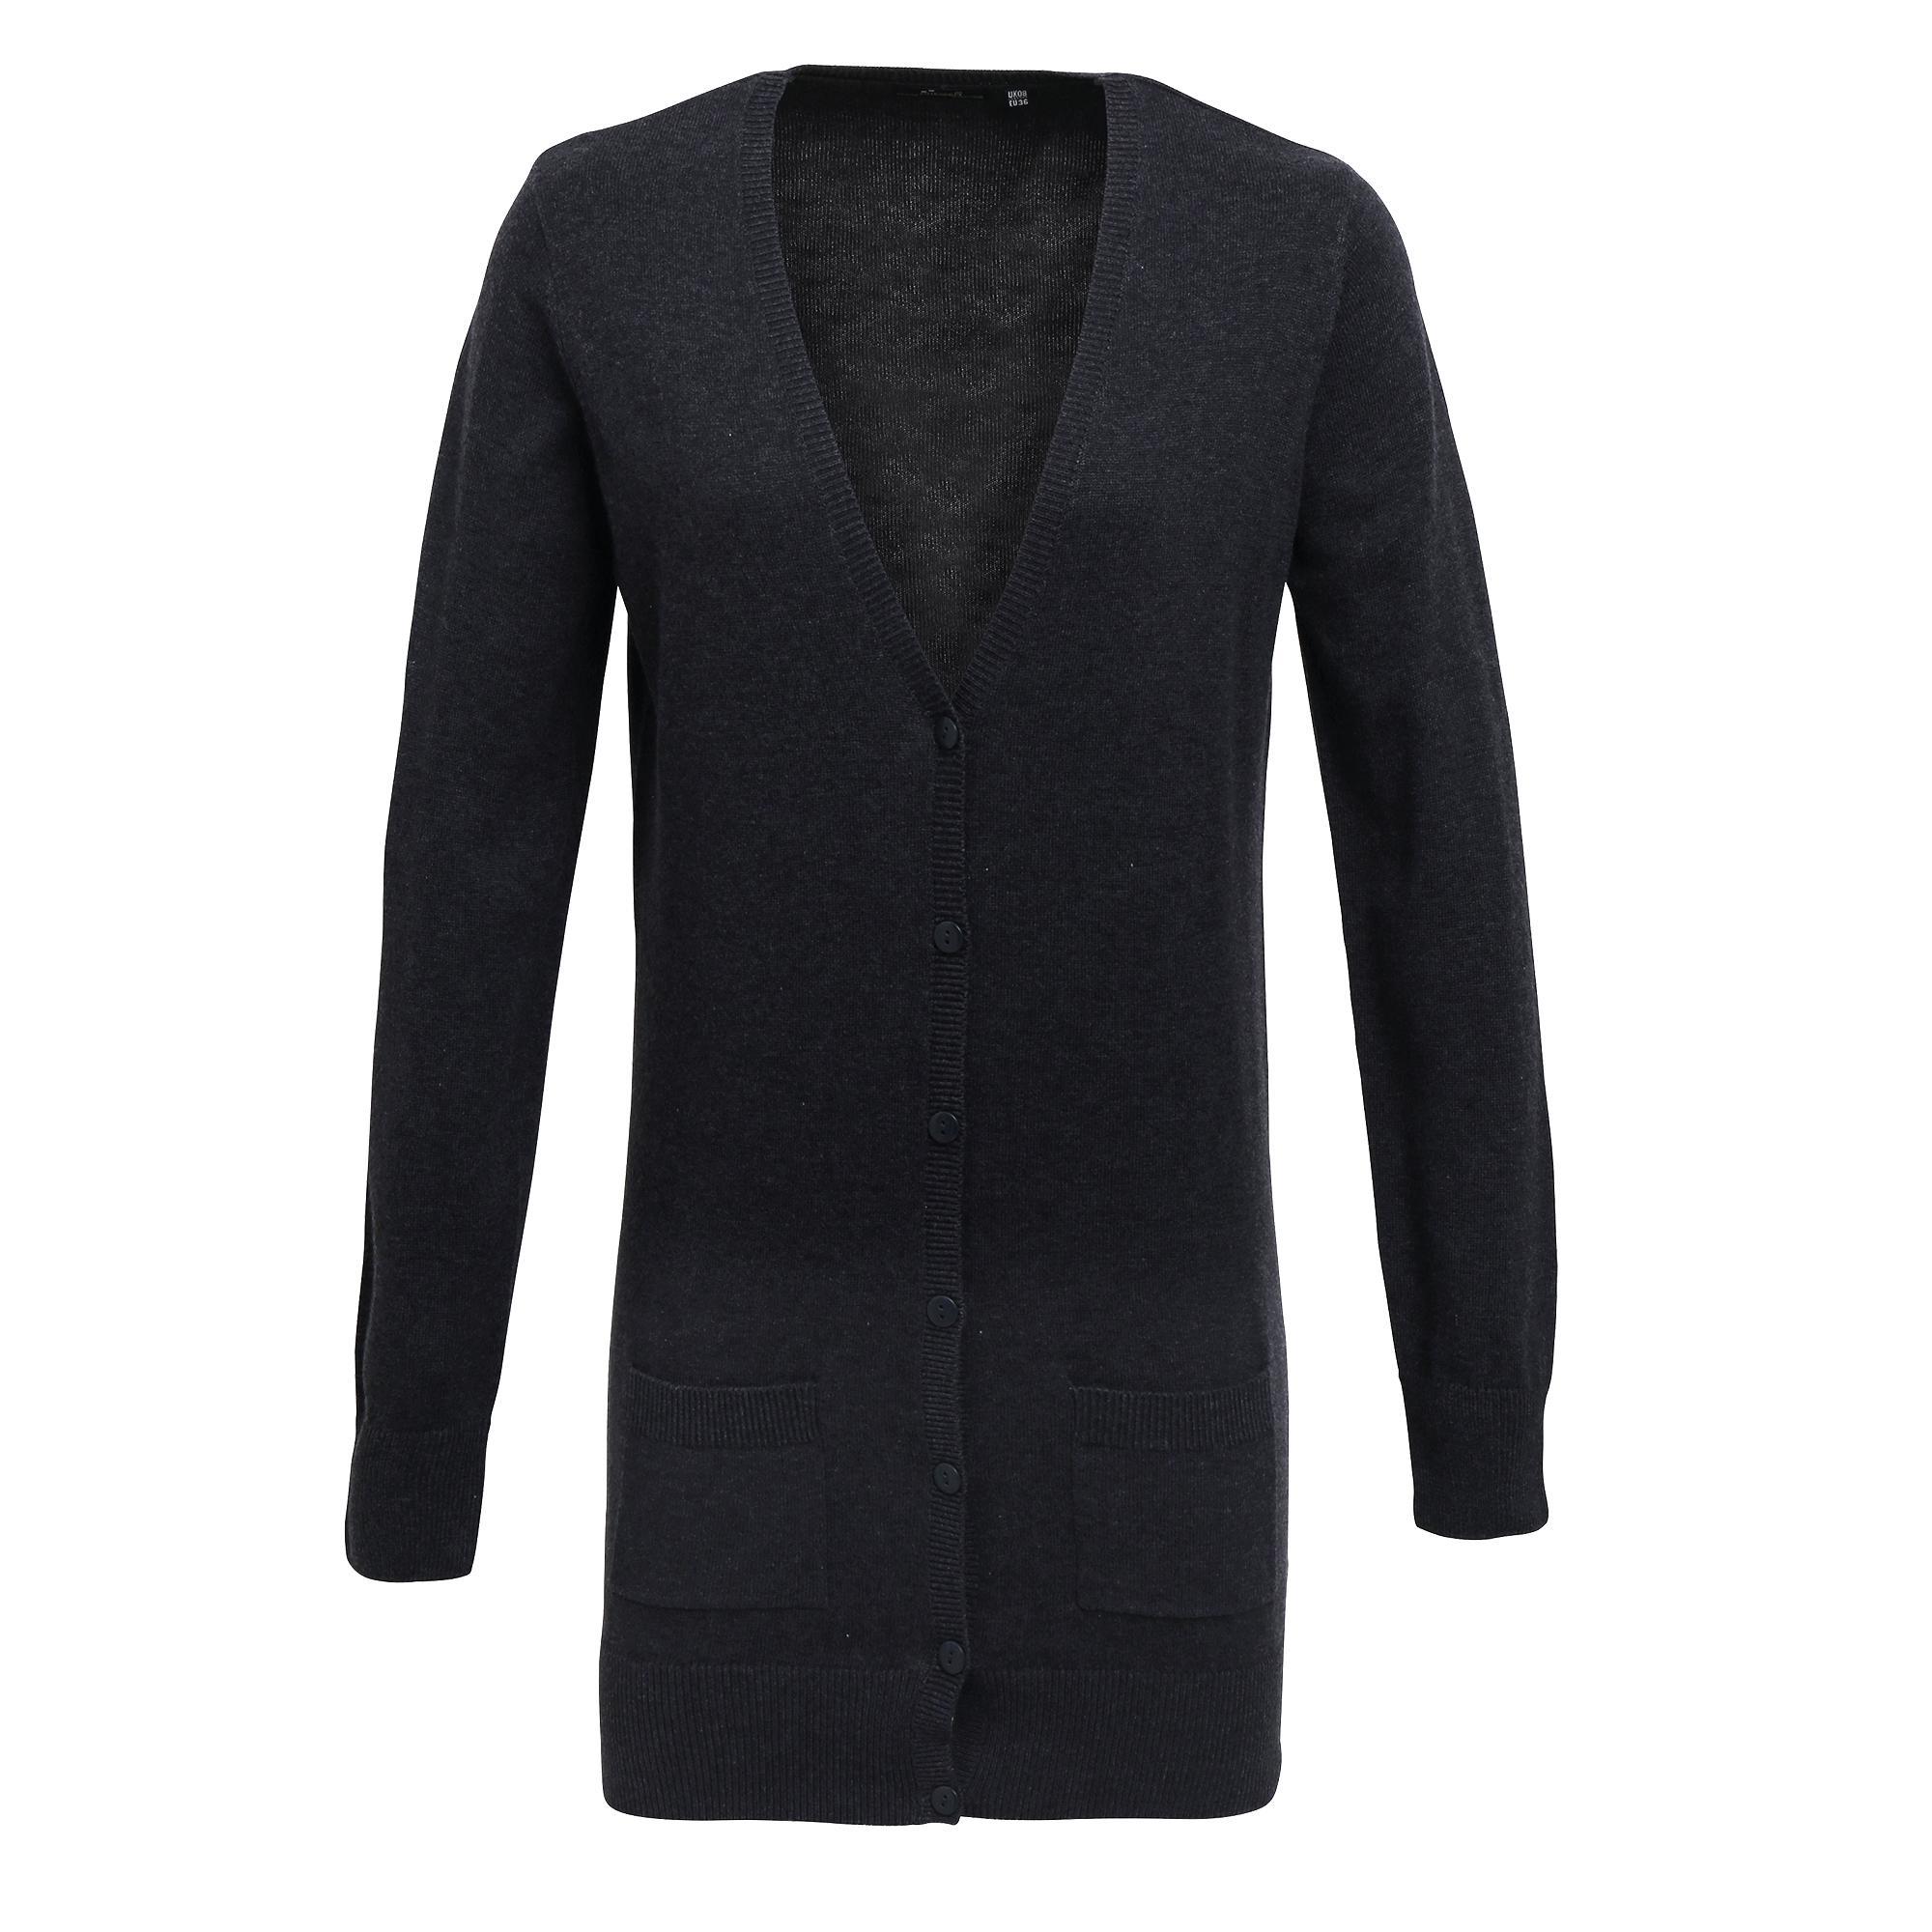 Premier Womens/Ladies Longline V Neck Knitted Cardigan (Charcoal) (8)